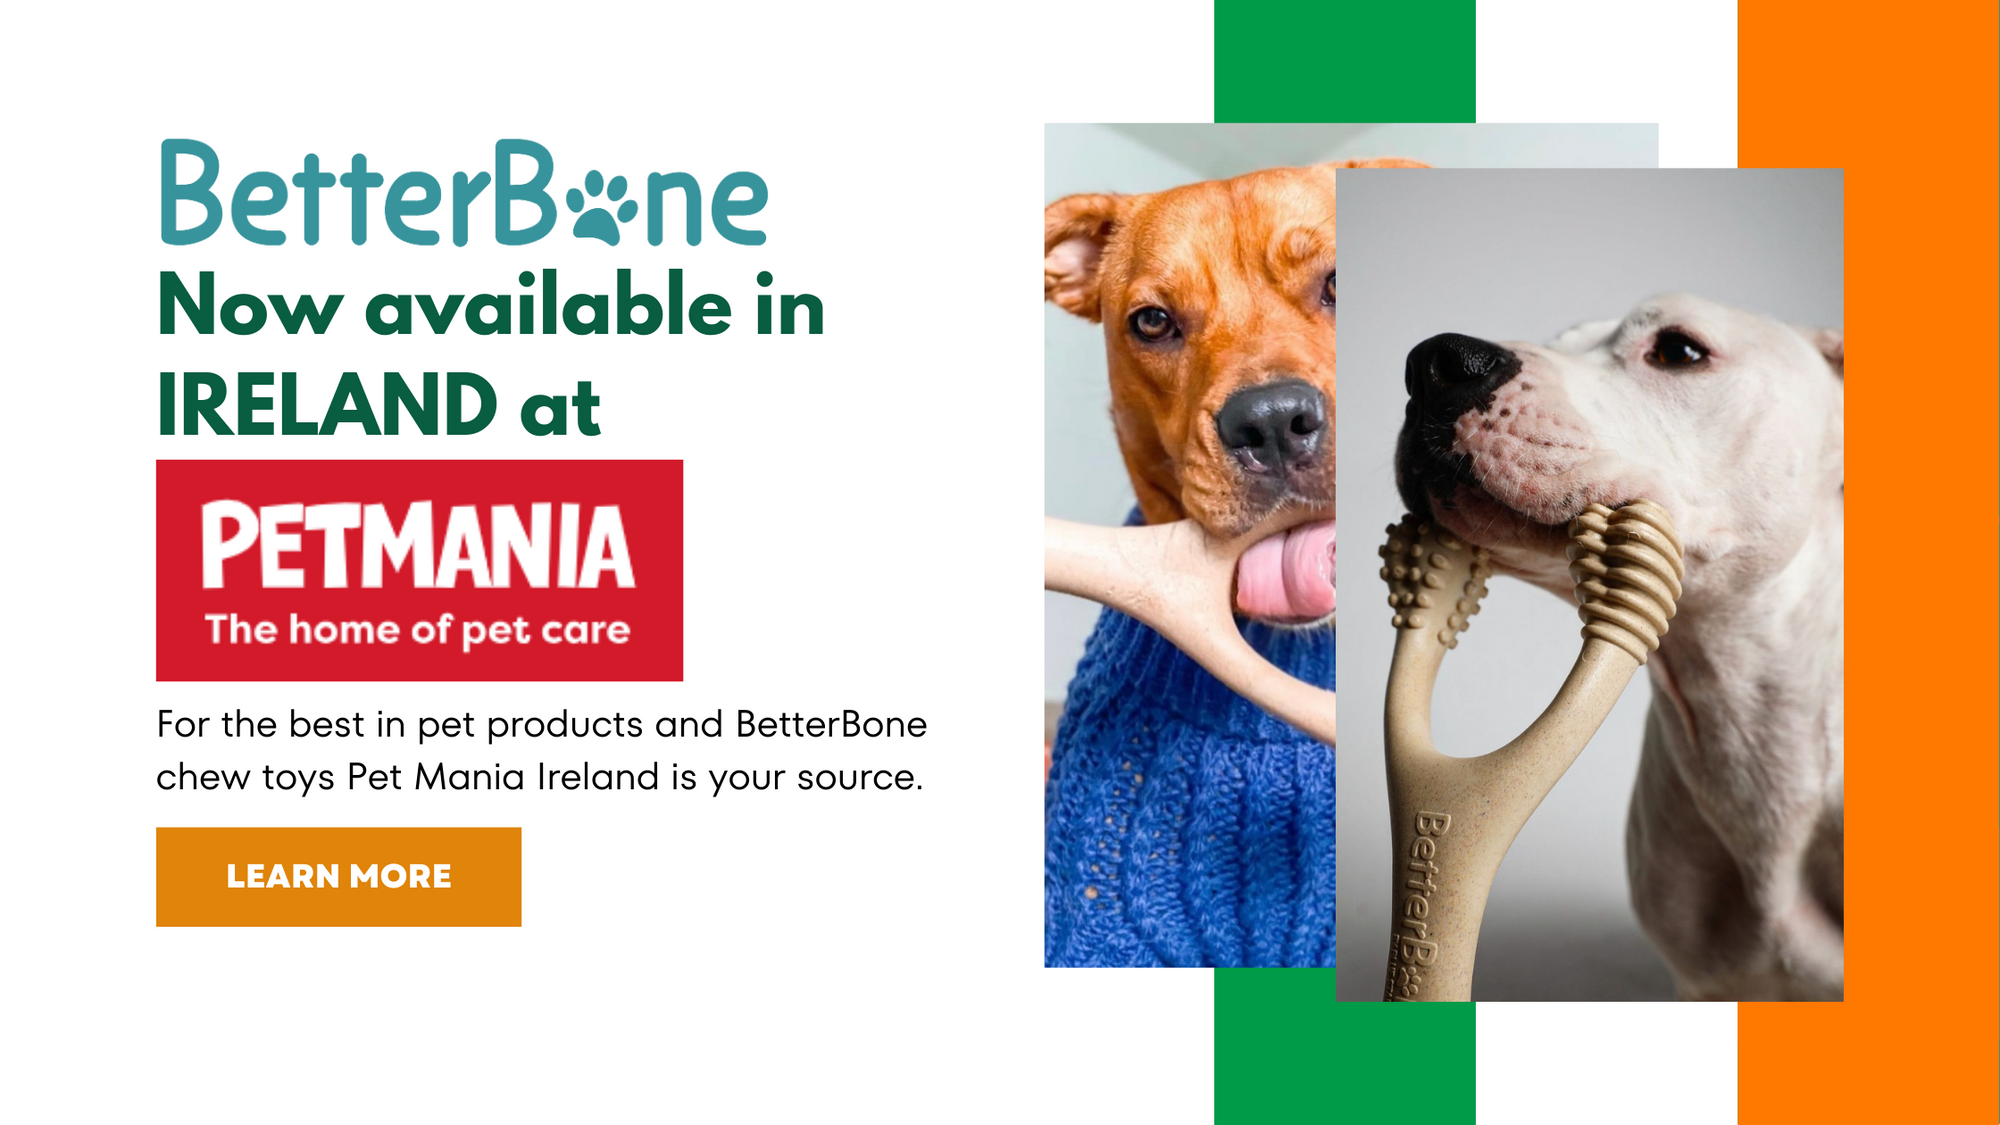 Exciting News for Pet Owners in Ireland: BetterBone Products Now Available at PetMania!